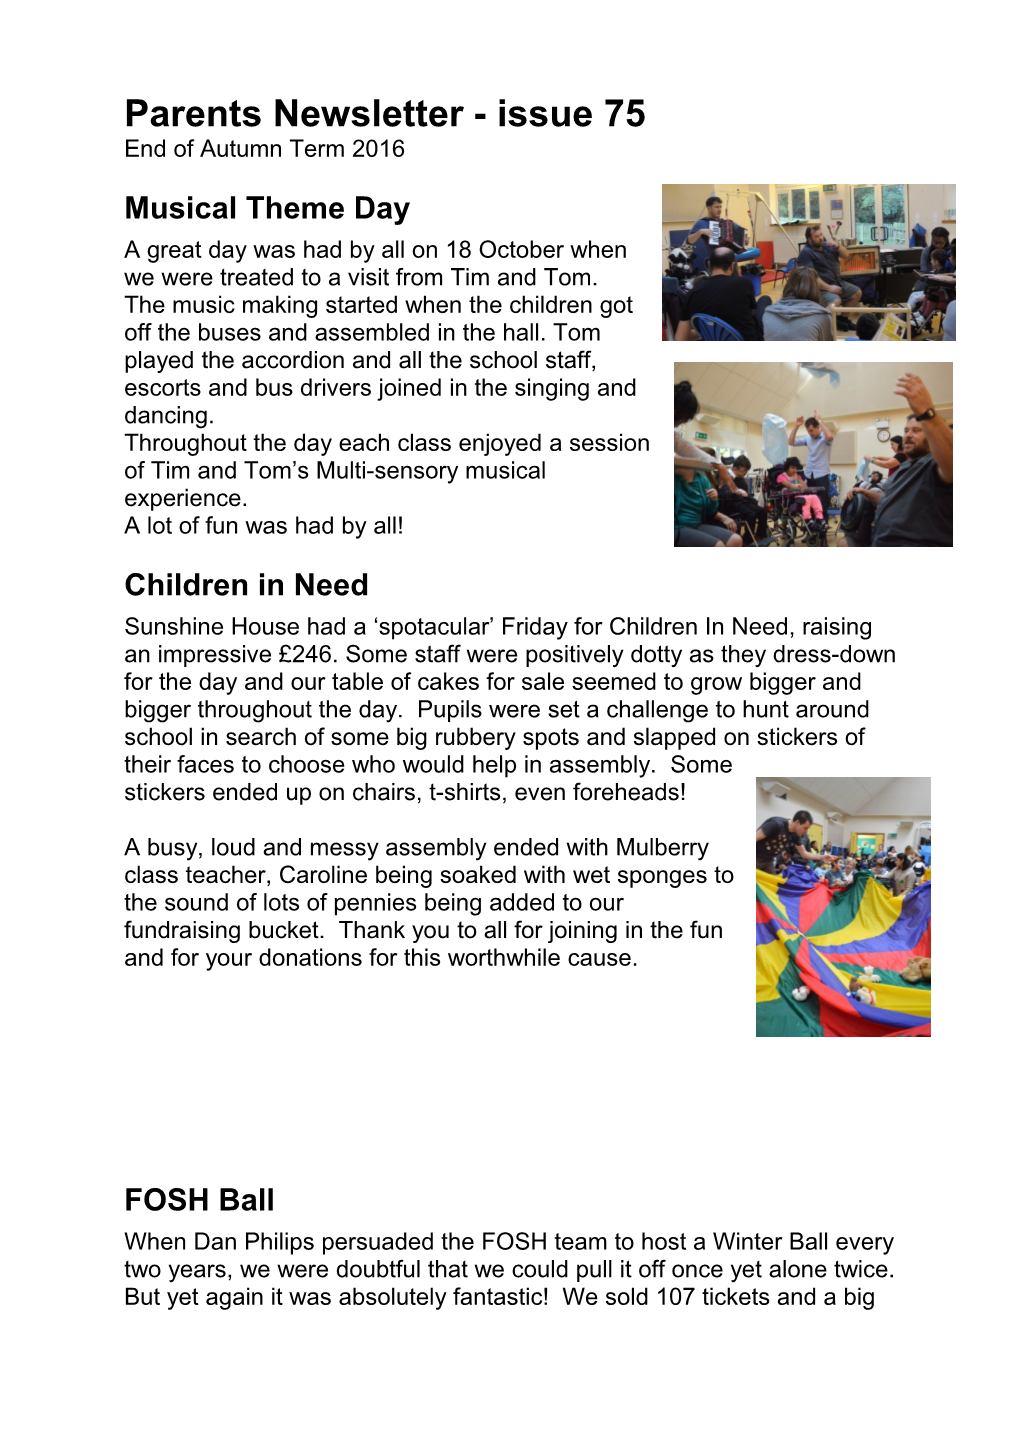 Parents Newsletter - Issue 75